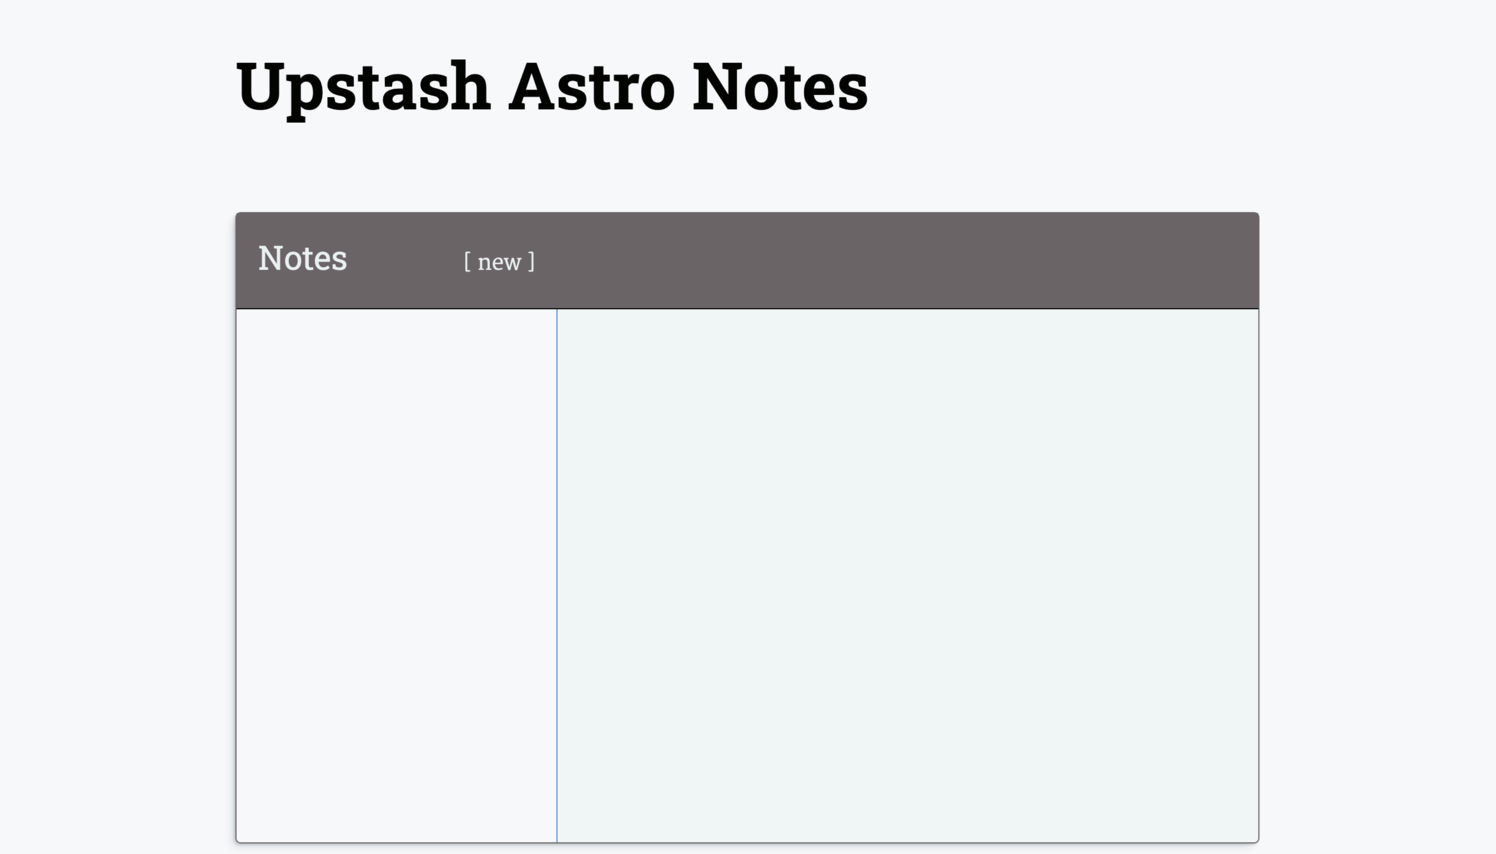 Get started with Astro and Redis: Screen capture shows title Upstash Astro Notes, with an empty view below where notes will go